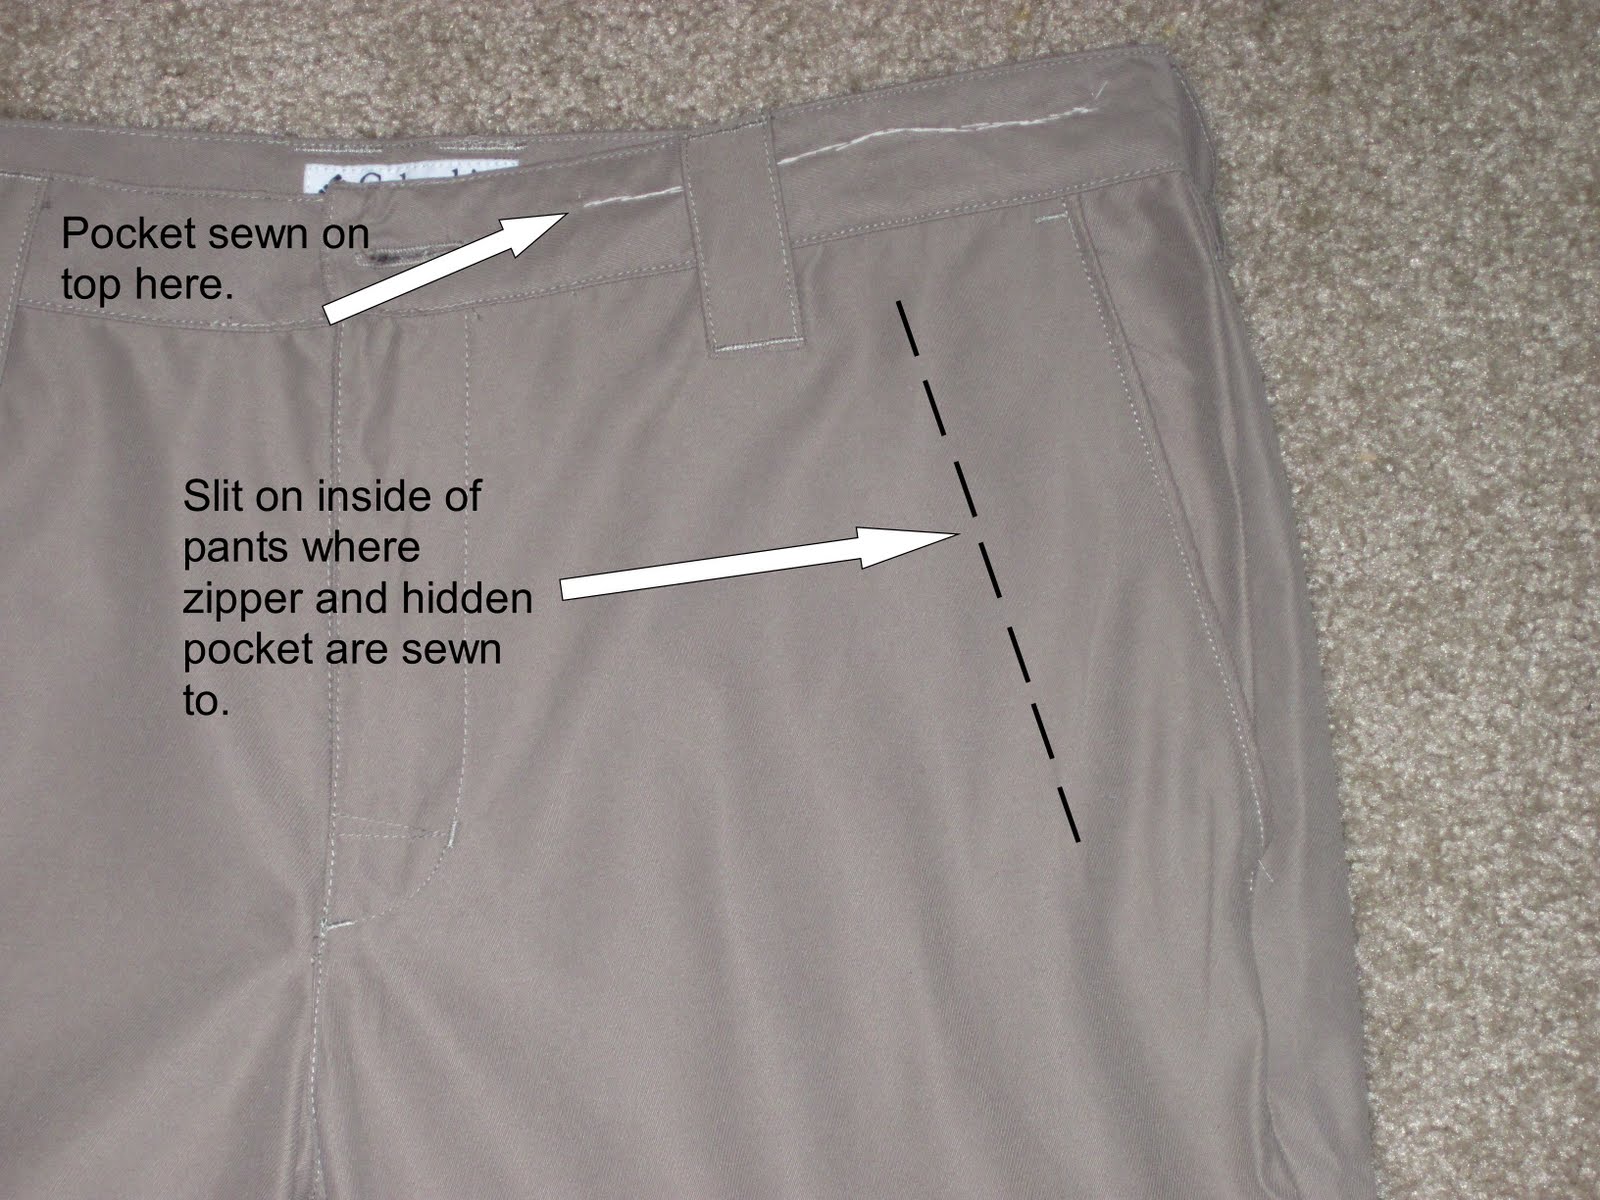 Sewing hidden pockets into pants for travel